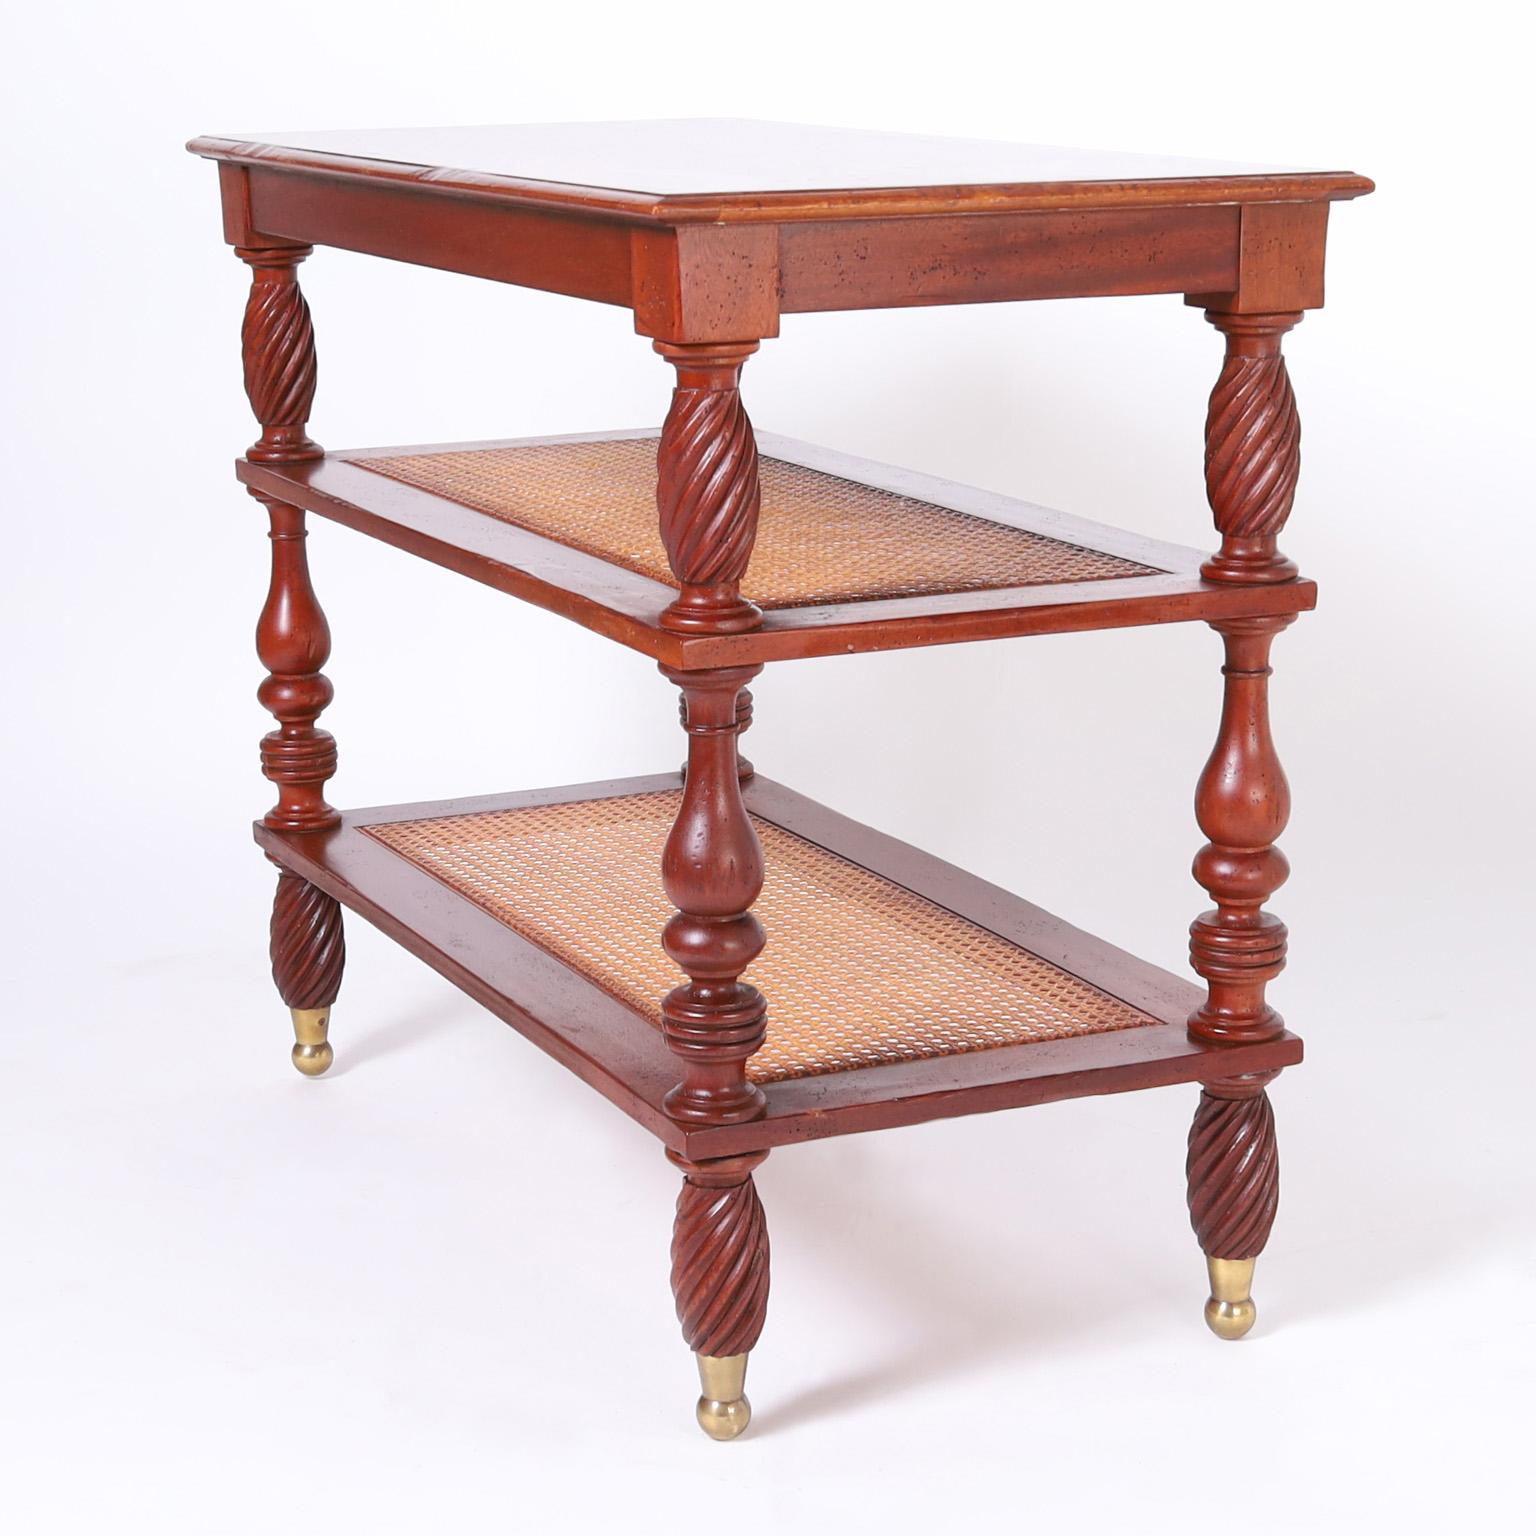 American British Colonial Style Three Tiered Stand by Baker